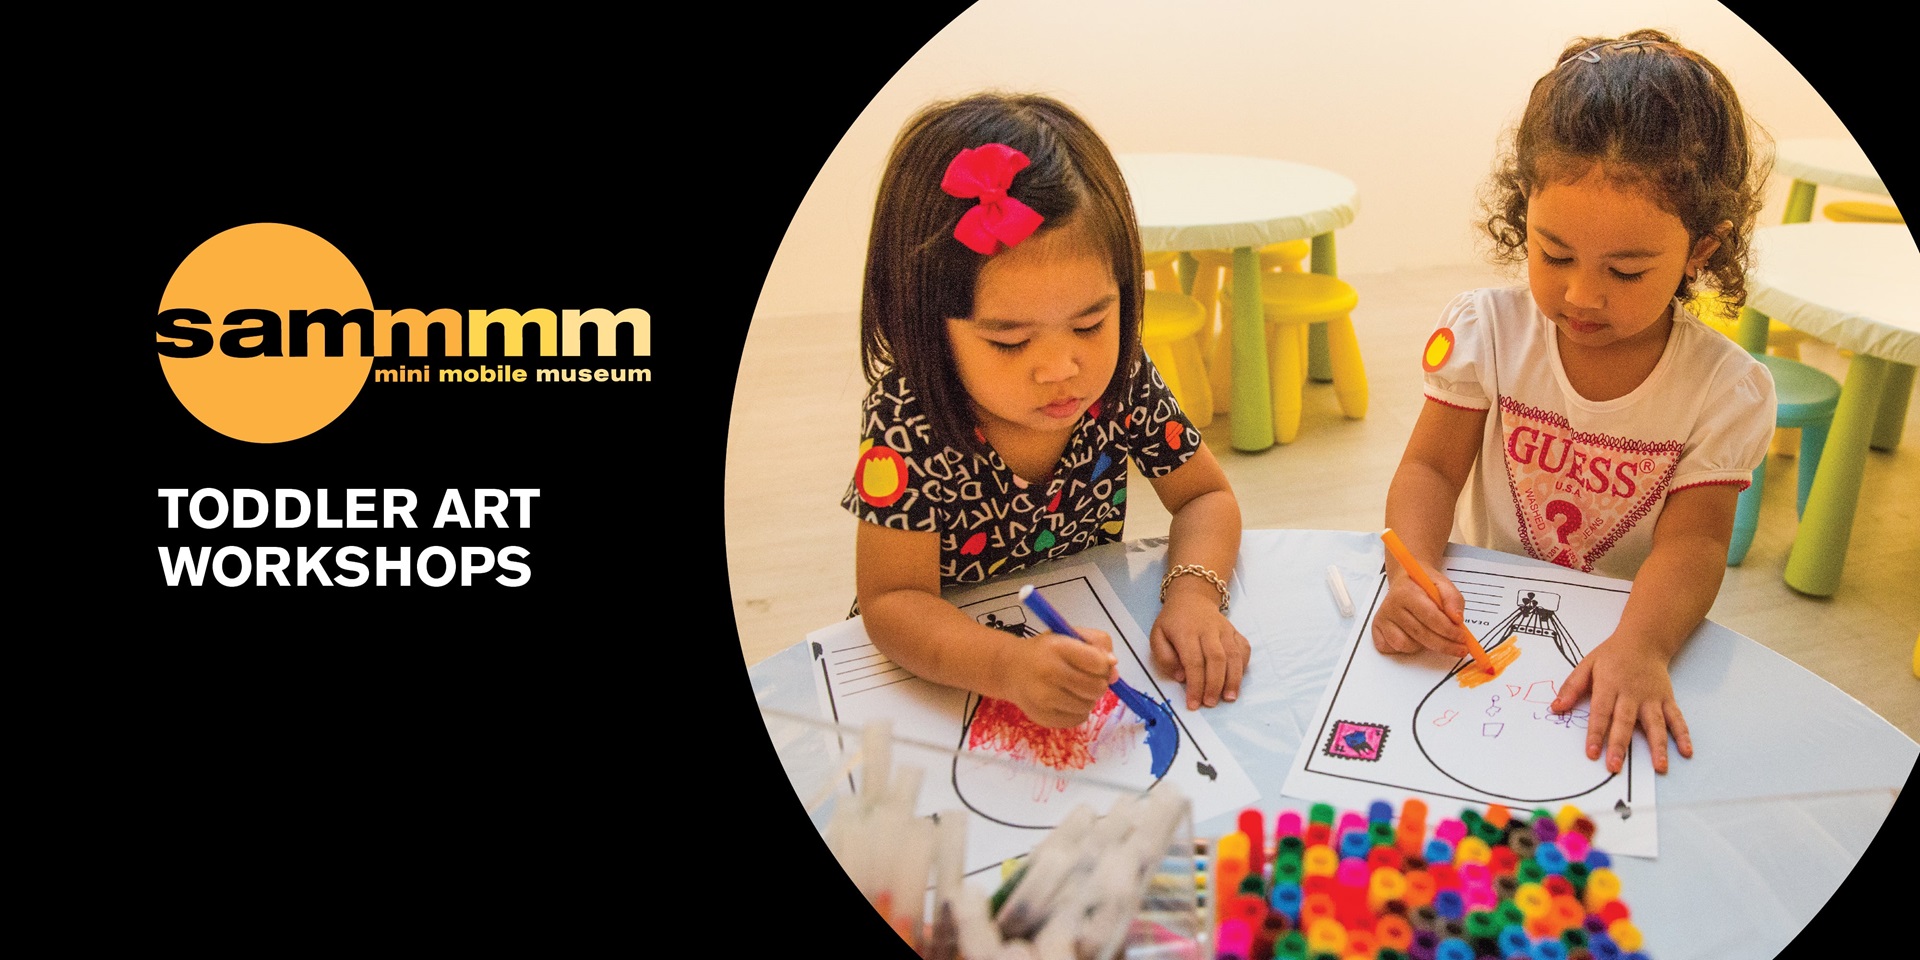 Toddler Art Workshops (18 months – 4 years old)